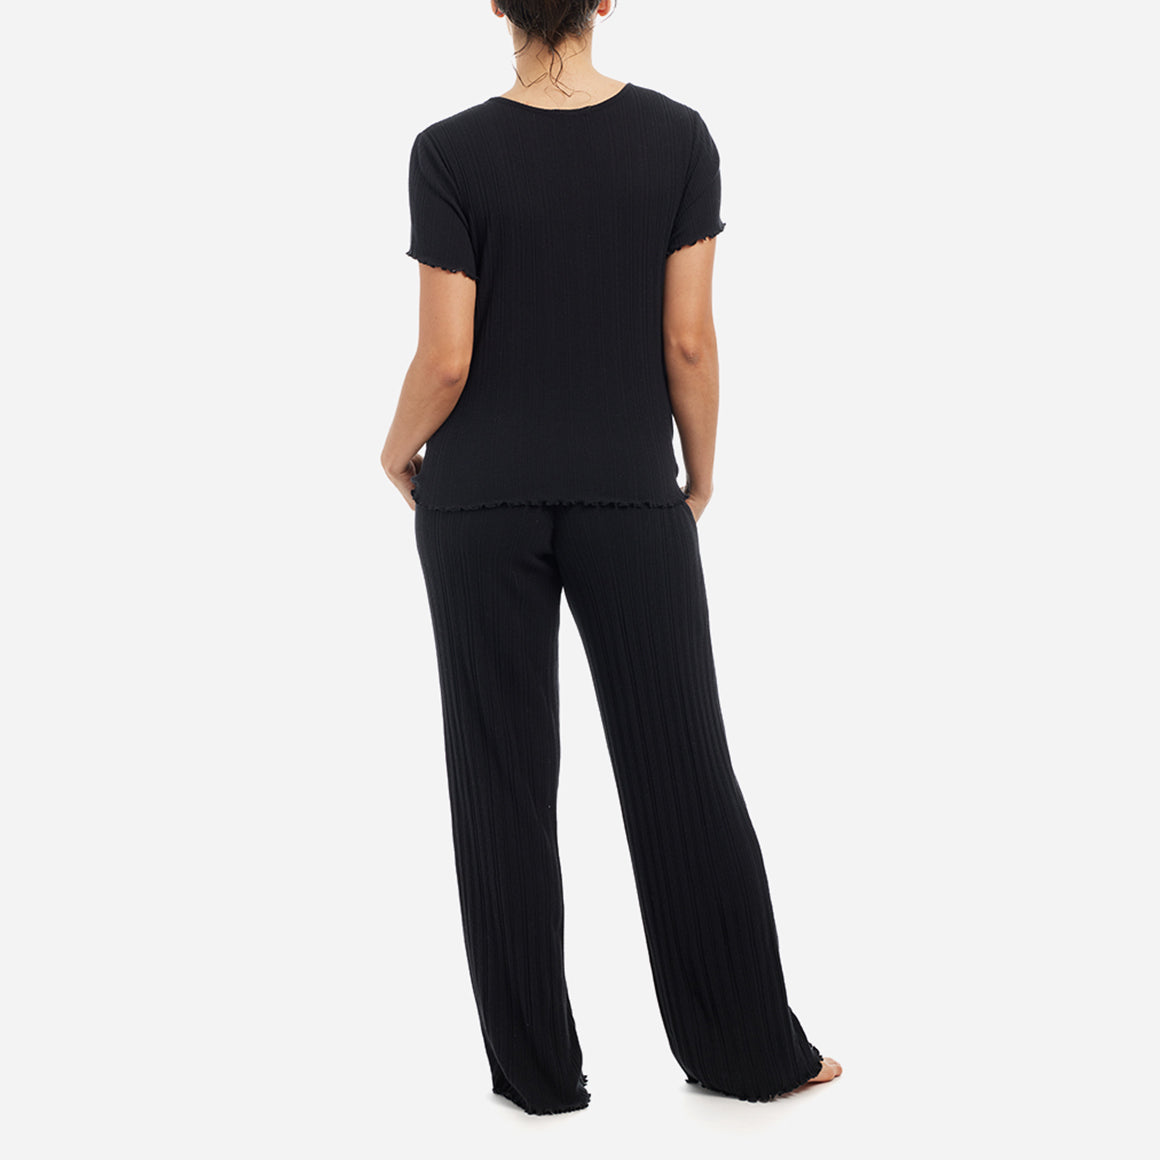 The Ravena Lounge Set has a relaxed-fit that features delicate trim details like a flattering keyhole opening and ruffled edges. The matching pants have convenient side pockets and a comfortable elastic waistband for a personalized fit, allowing you to move freely and unrestricted.